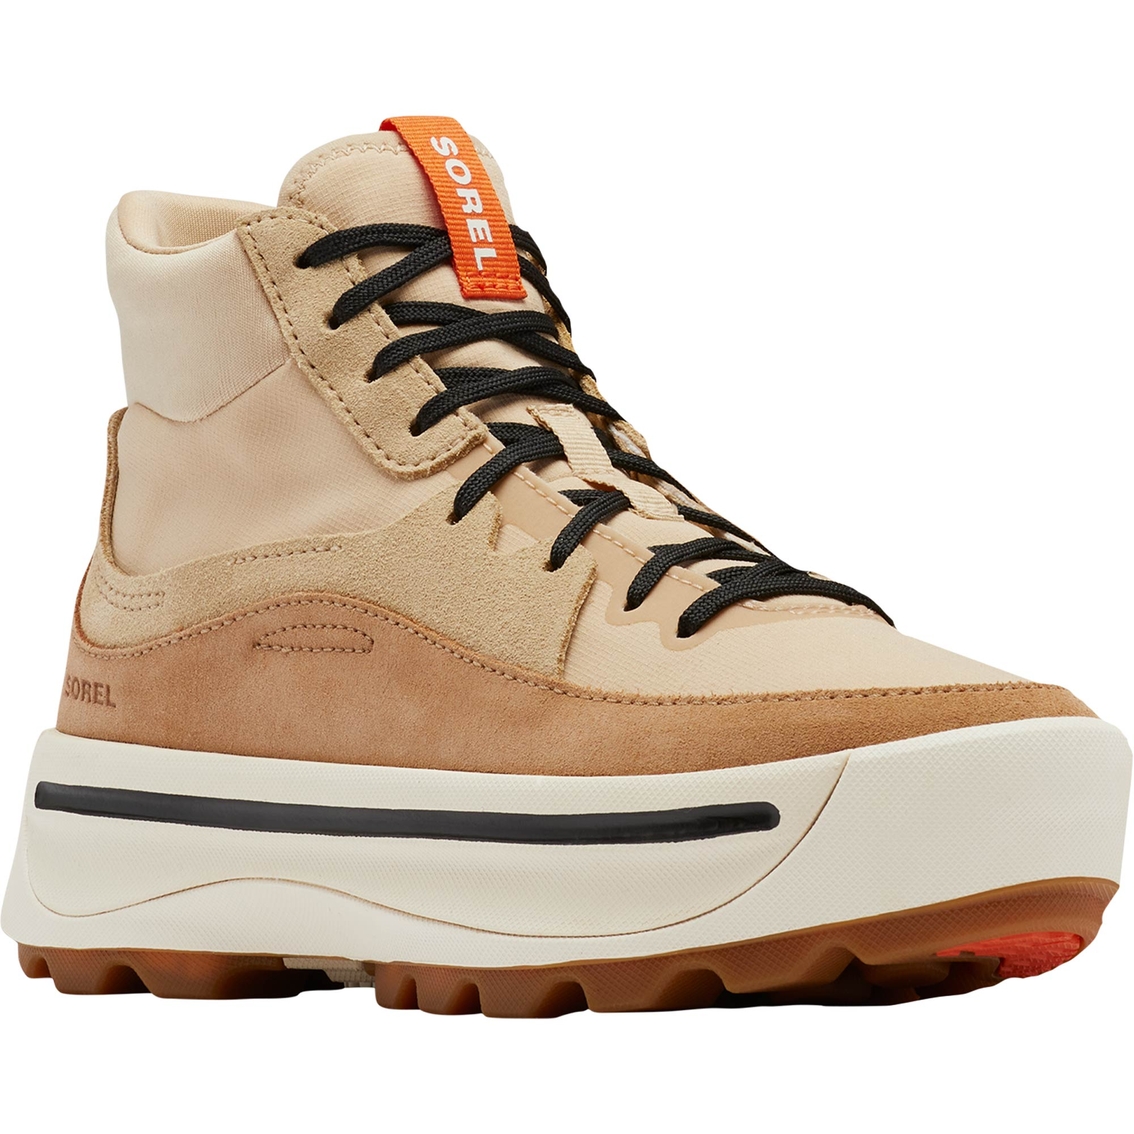 Sorel Ona 503 Mid Shoes | Sneakers | Shoes | Shop The Exchange